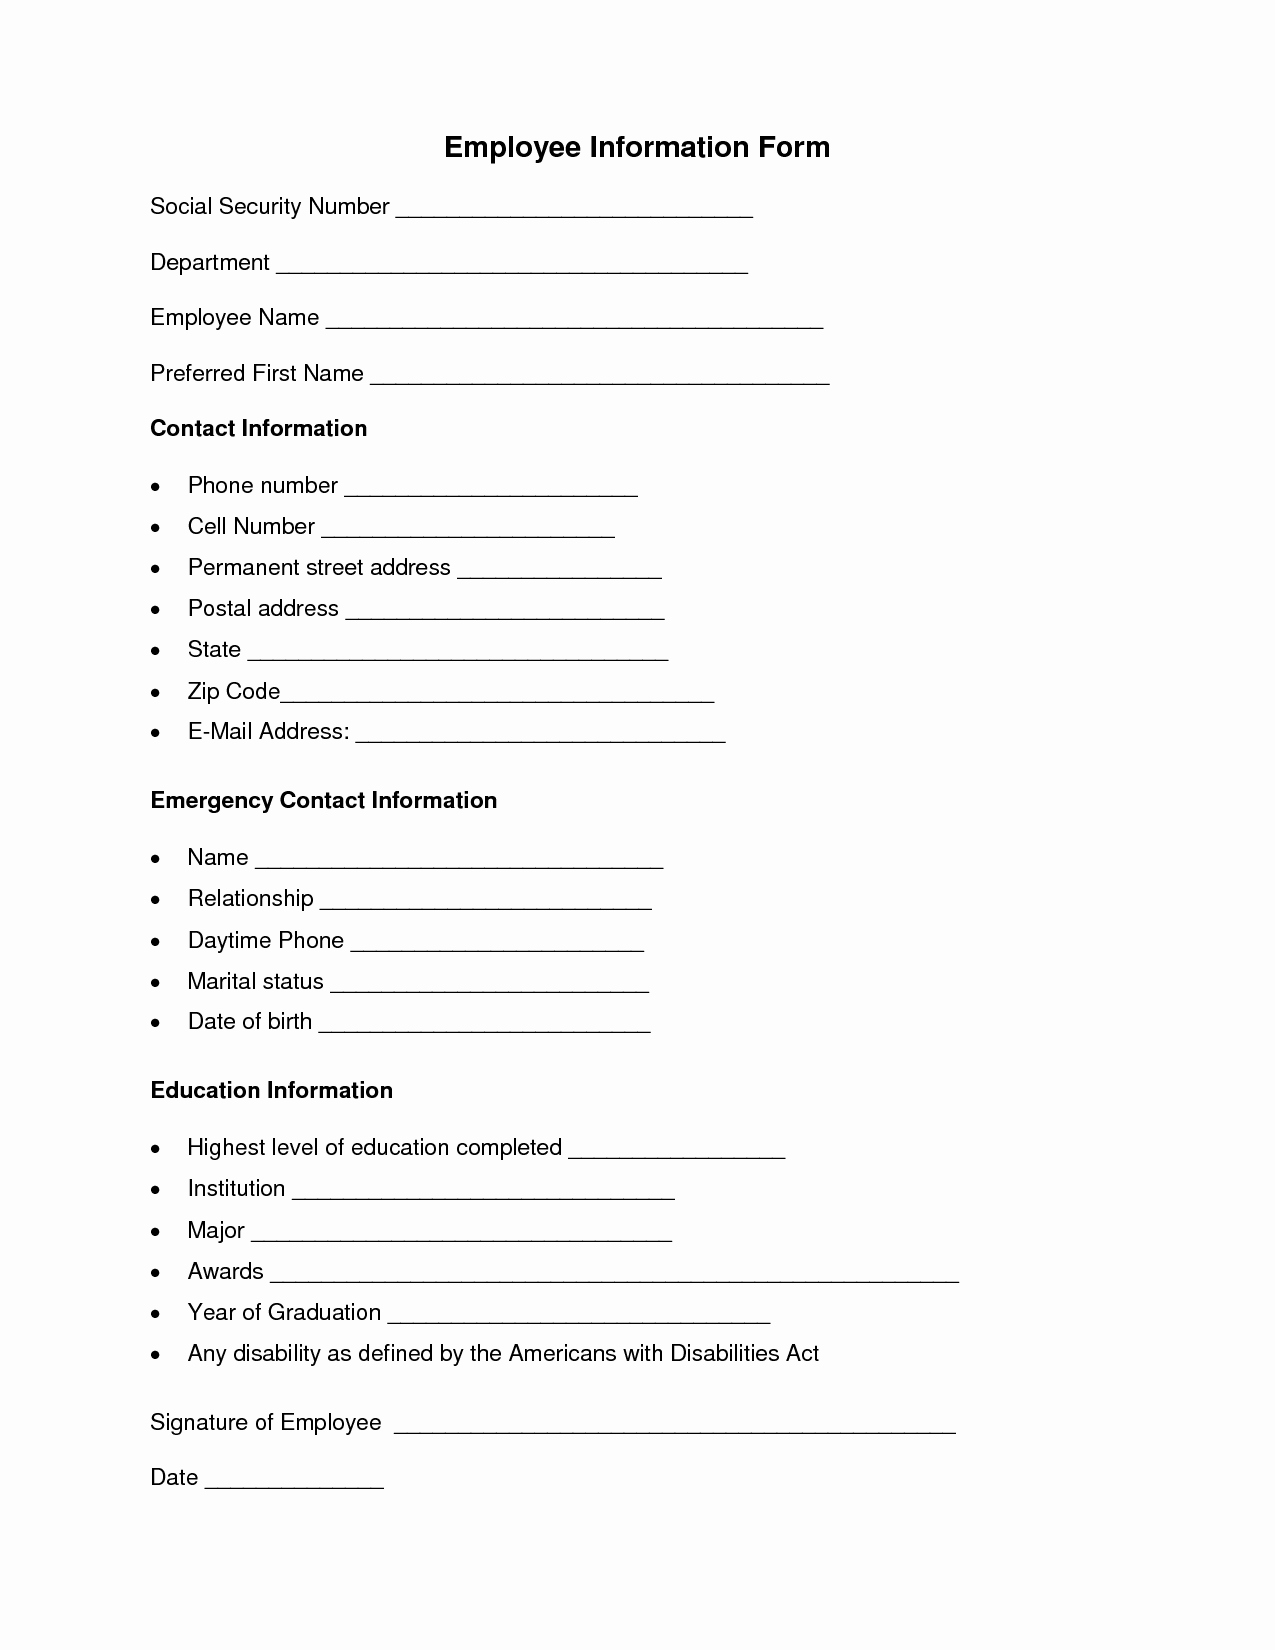 information form template awesome employee information form employee forms of information form template